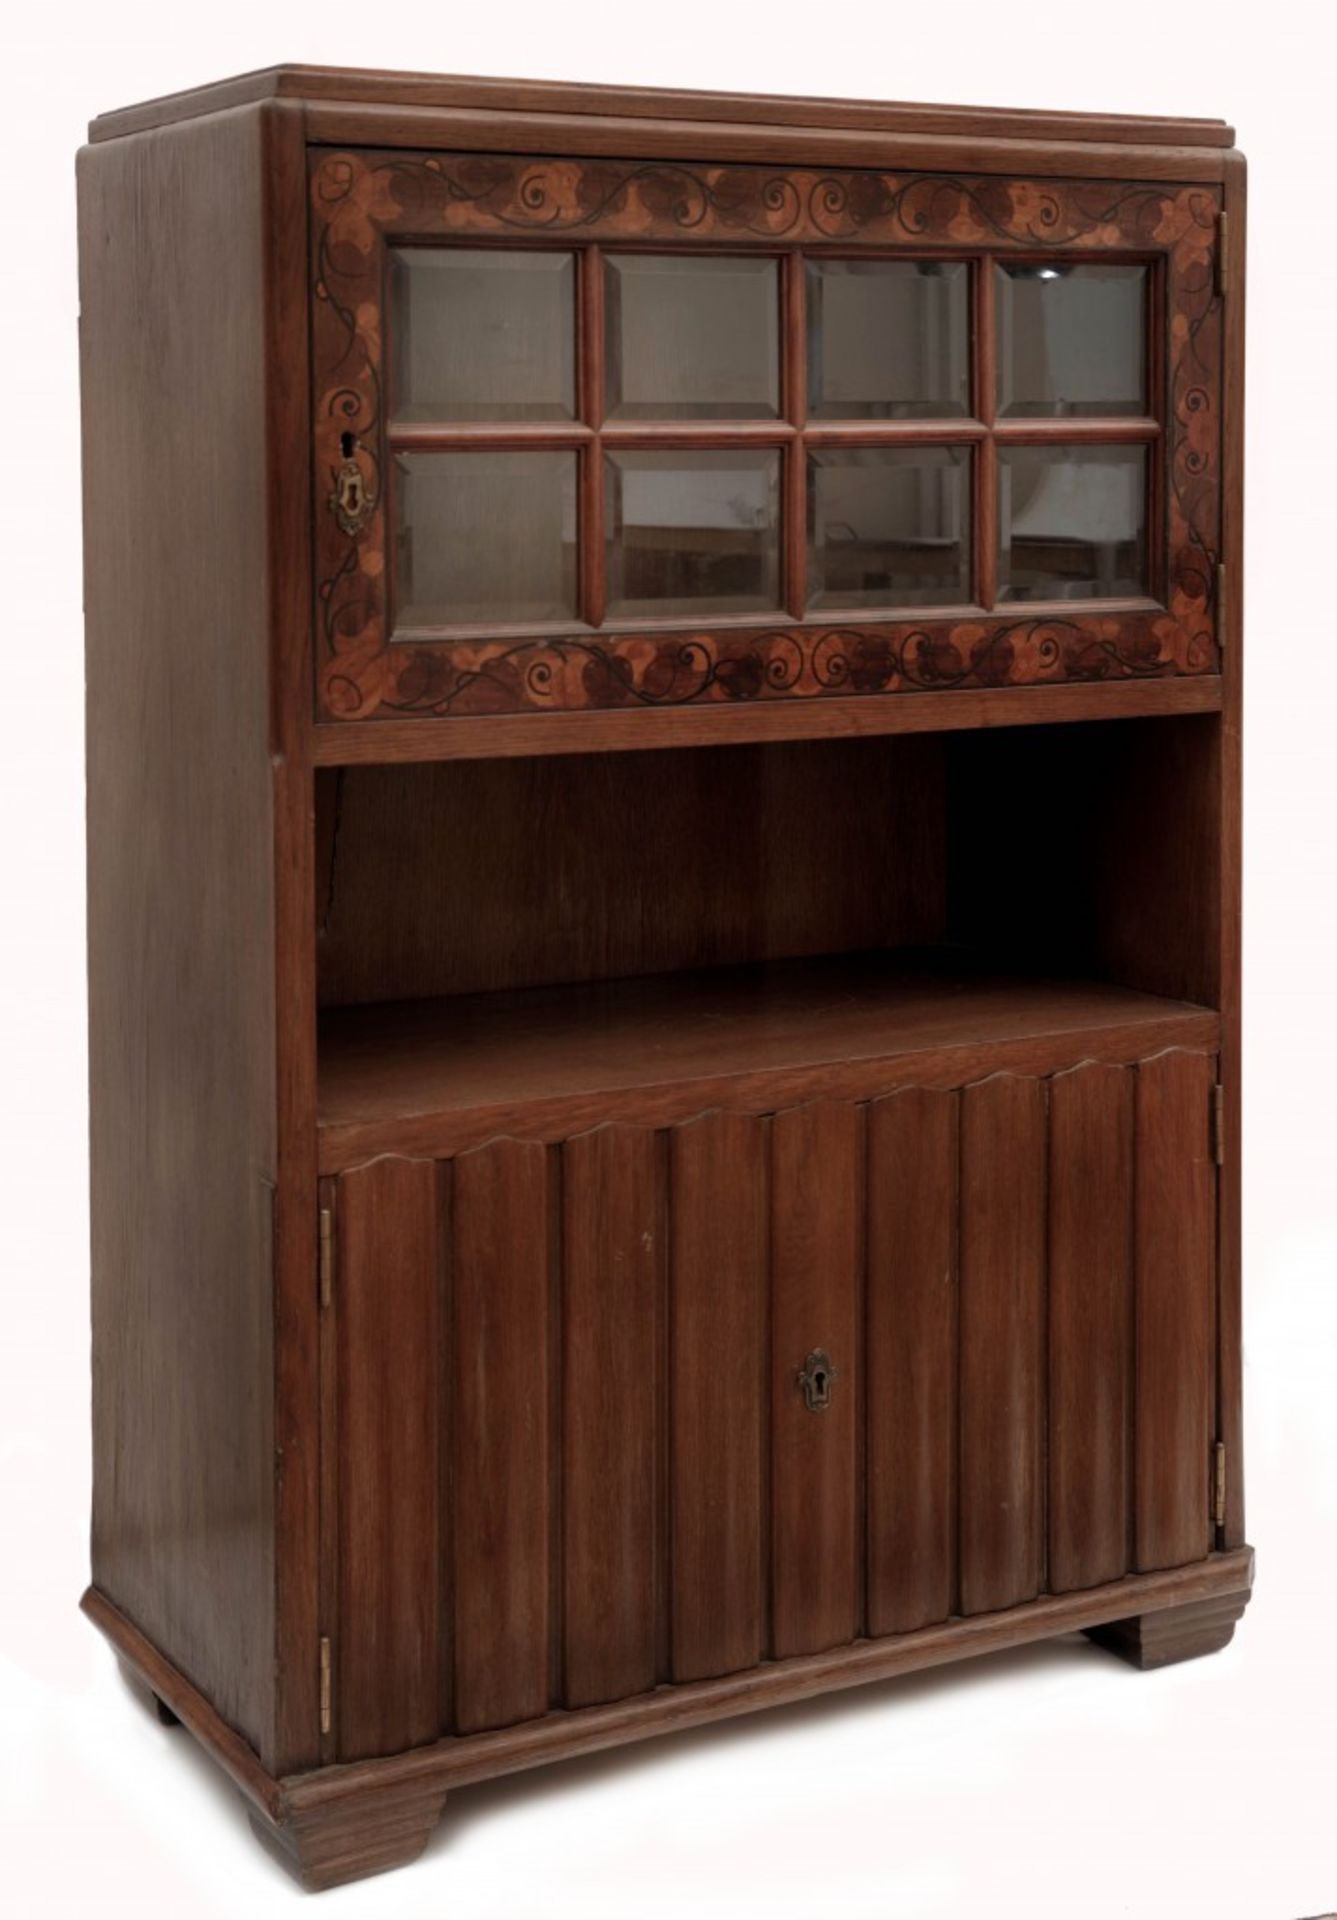 An Art Nouveau Display Cabinet - Image 2 of 2